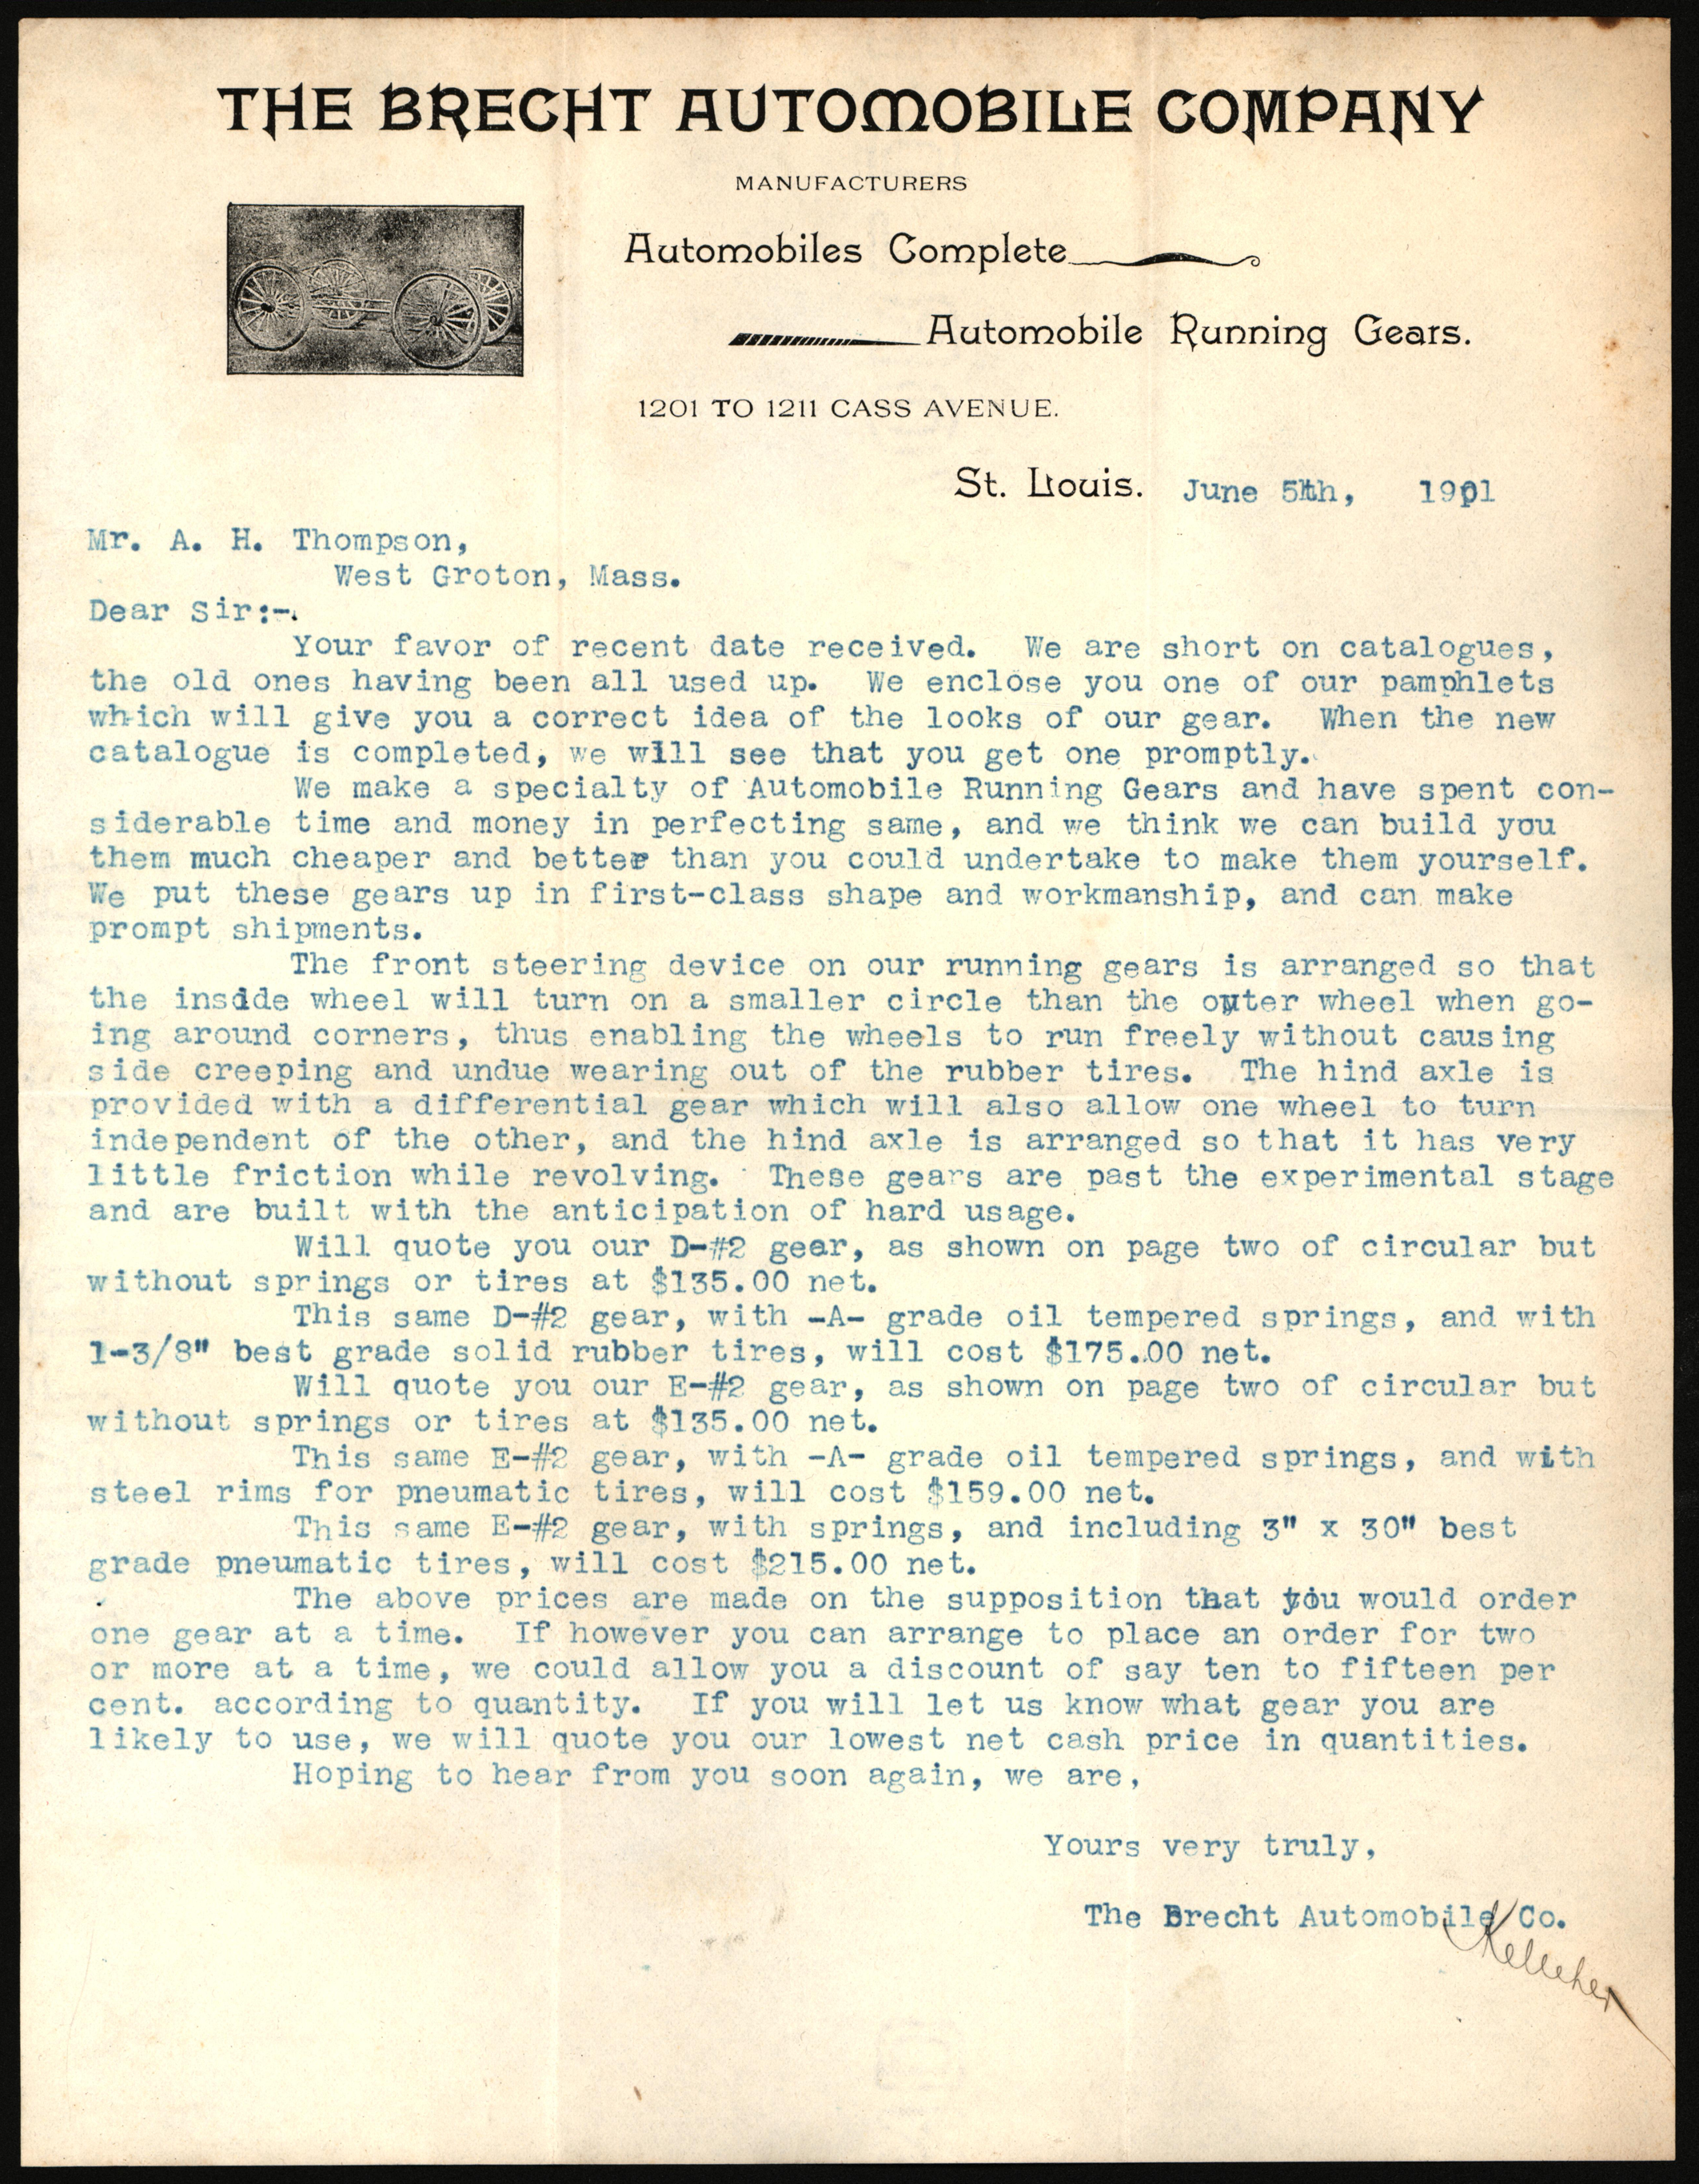 Brecht Automobile Company, St. Louis, MO, Letter to A. H. Thompson of West Groton, MA, June 5th, 1901